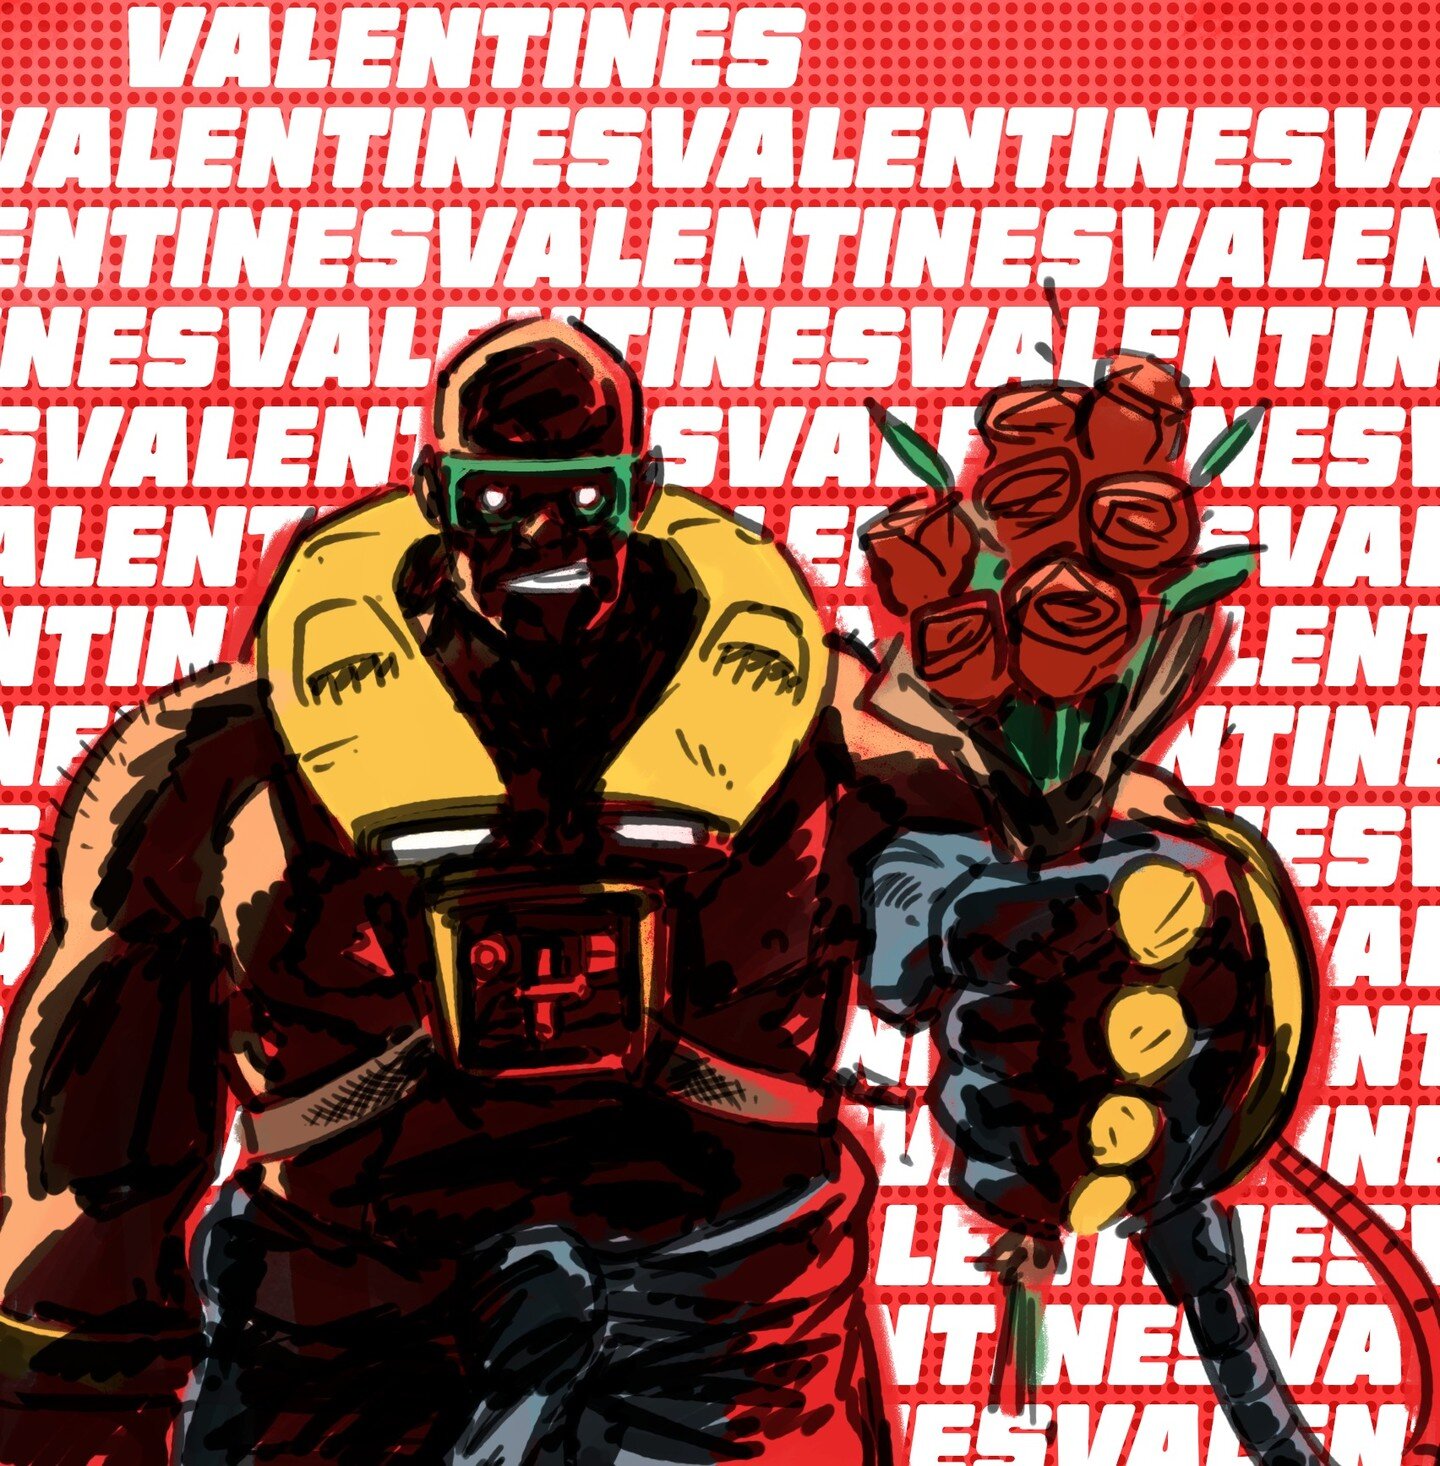 Happy Valentine's day! 🌹
Who is getting red roses from Boris? 👀

#valentine #valentinesday #boardgames #art #illustration #artwork #br&aelig;tspil #valentinesdaydrawing #combofighter